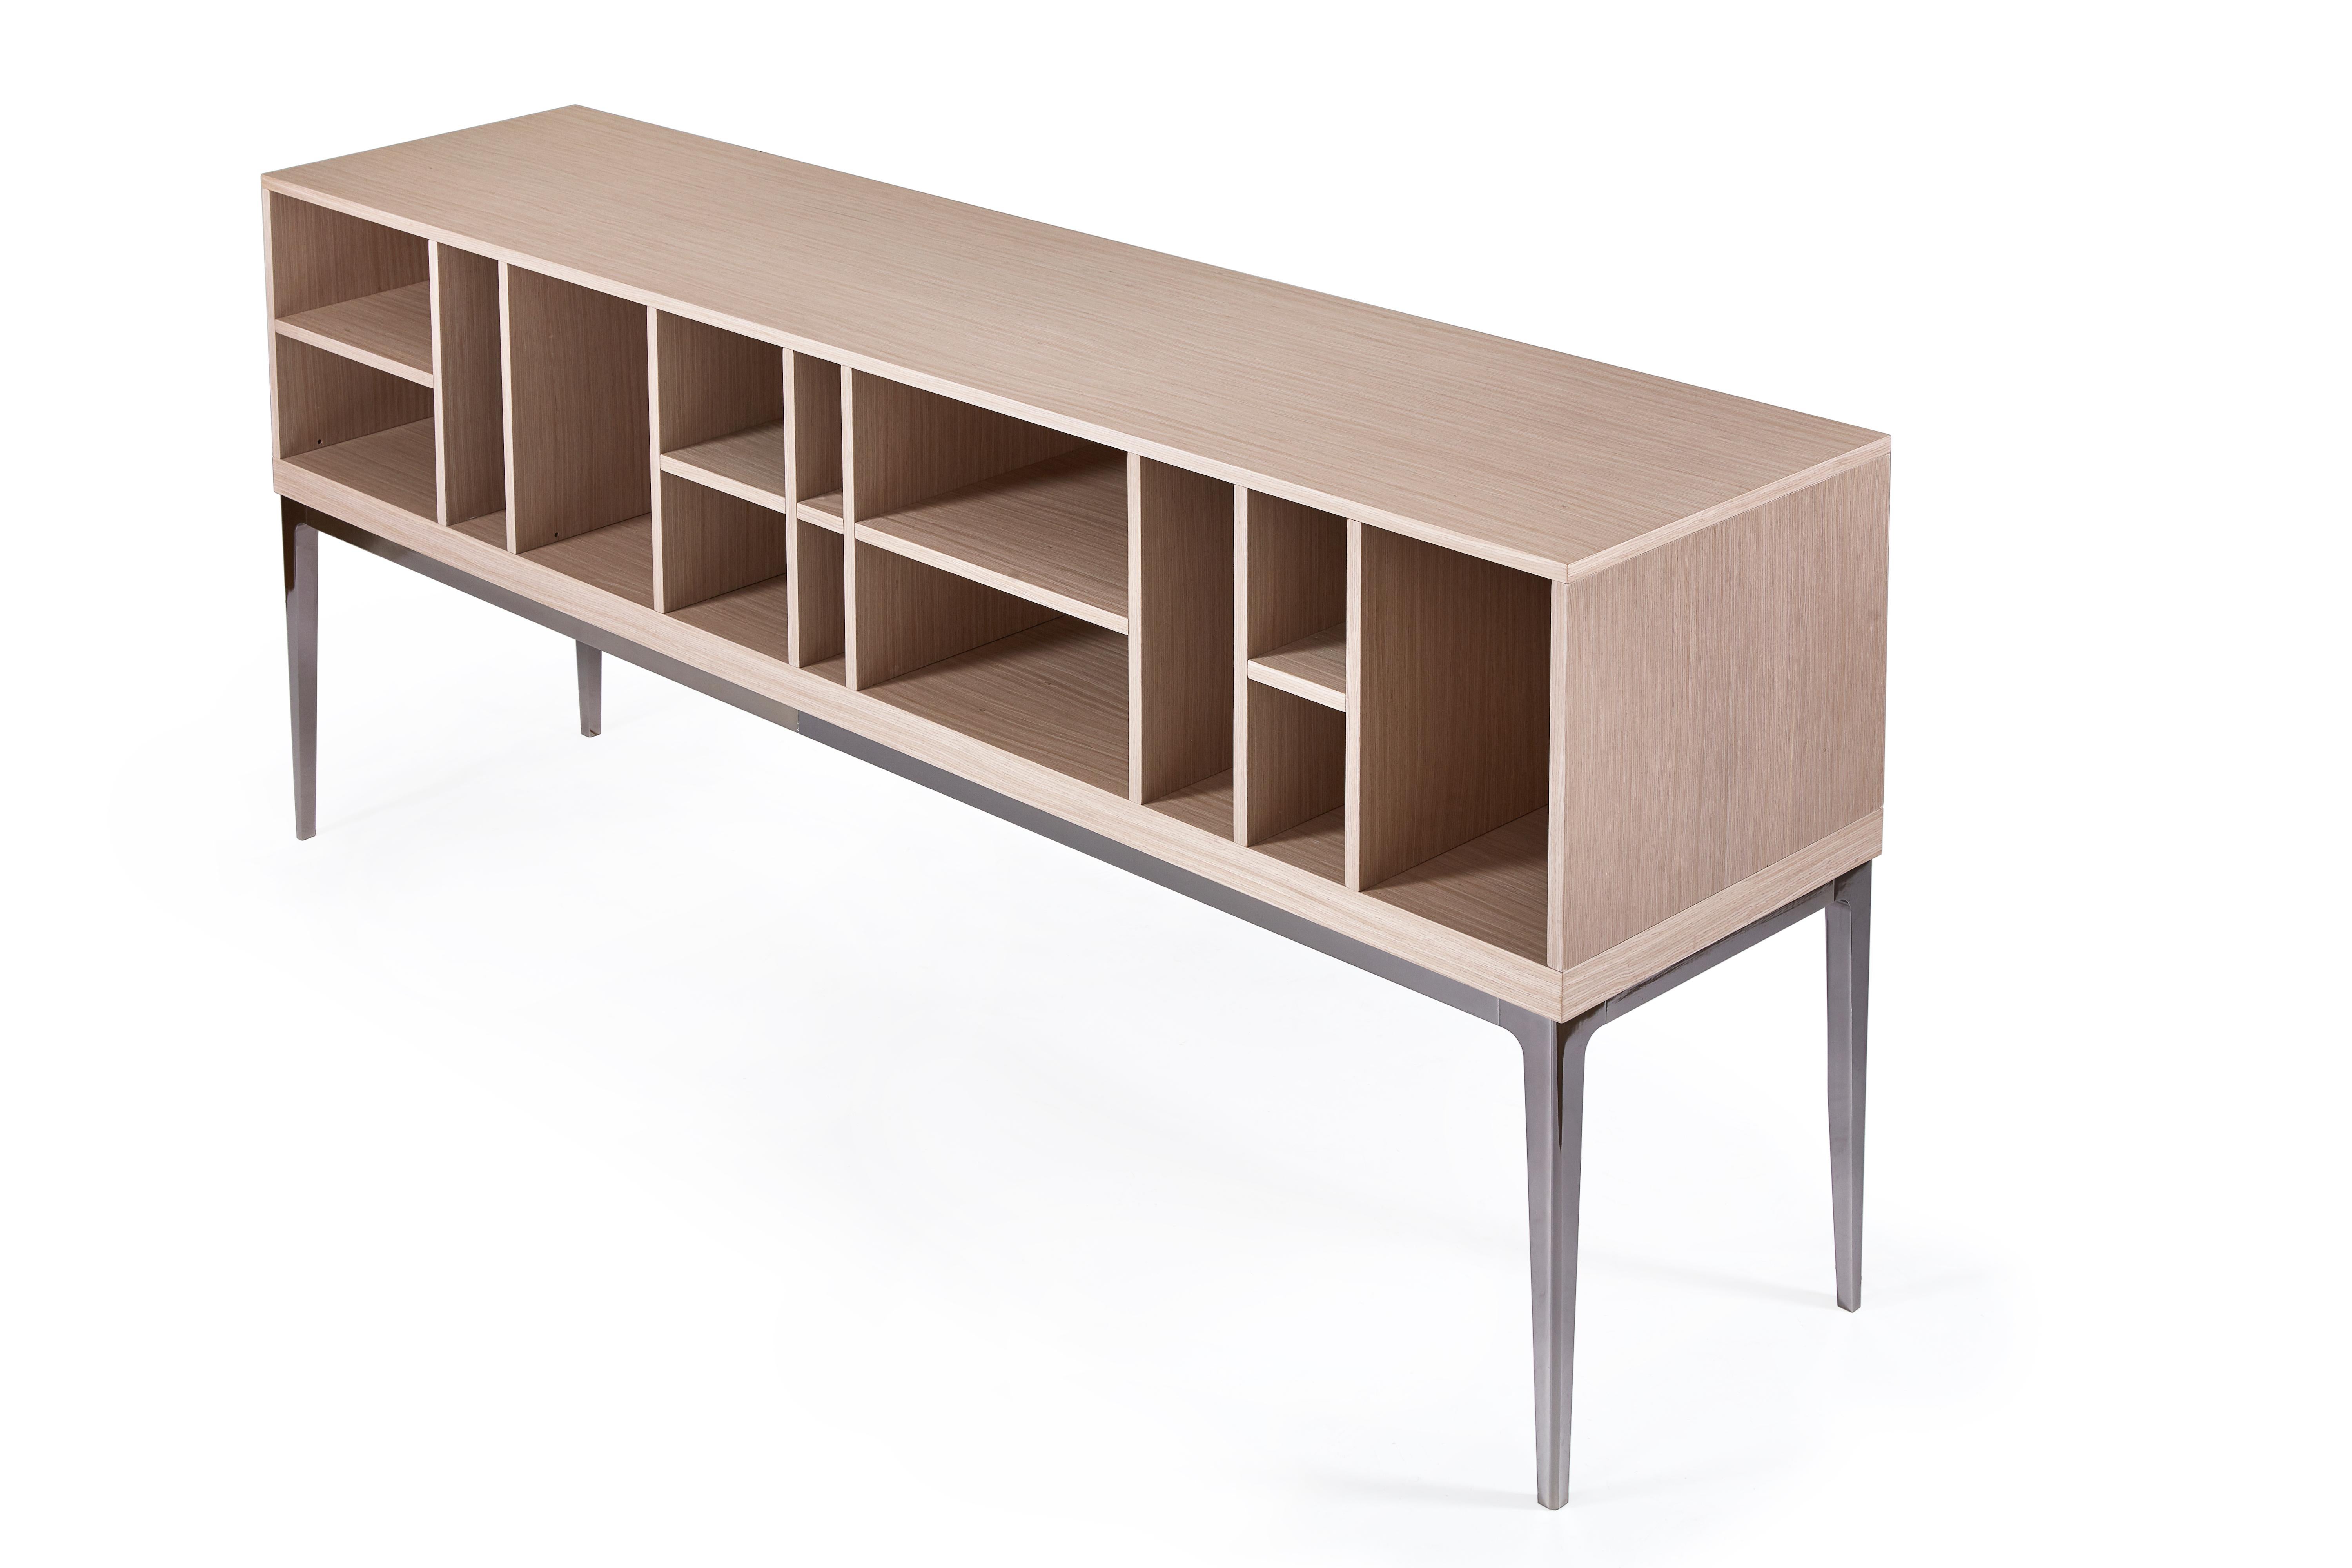 Make shelf styling a breeze with this perfectly proportioned console that doubles as a bookshelf. The simple solution to elevating the look of any living or office space.